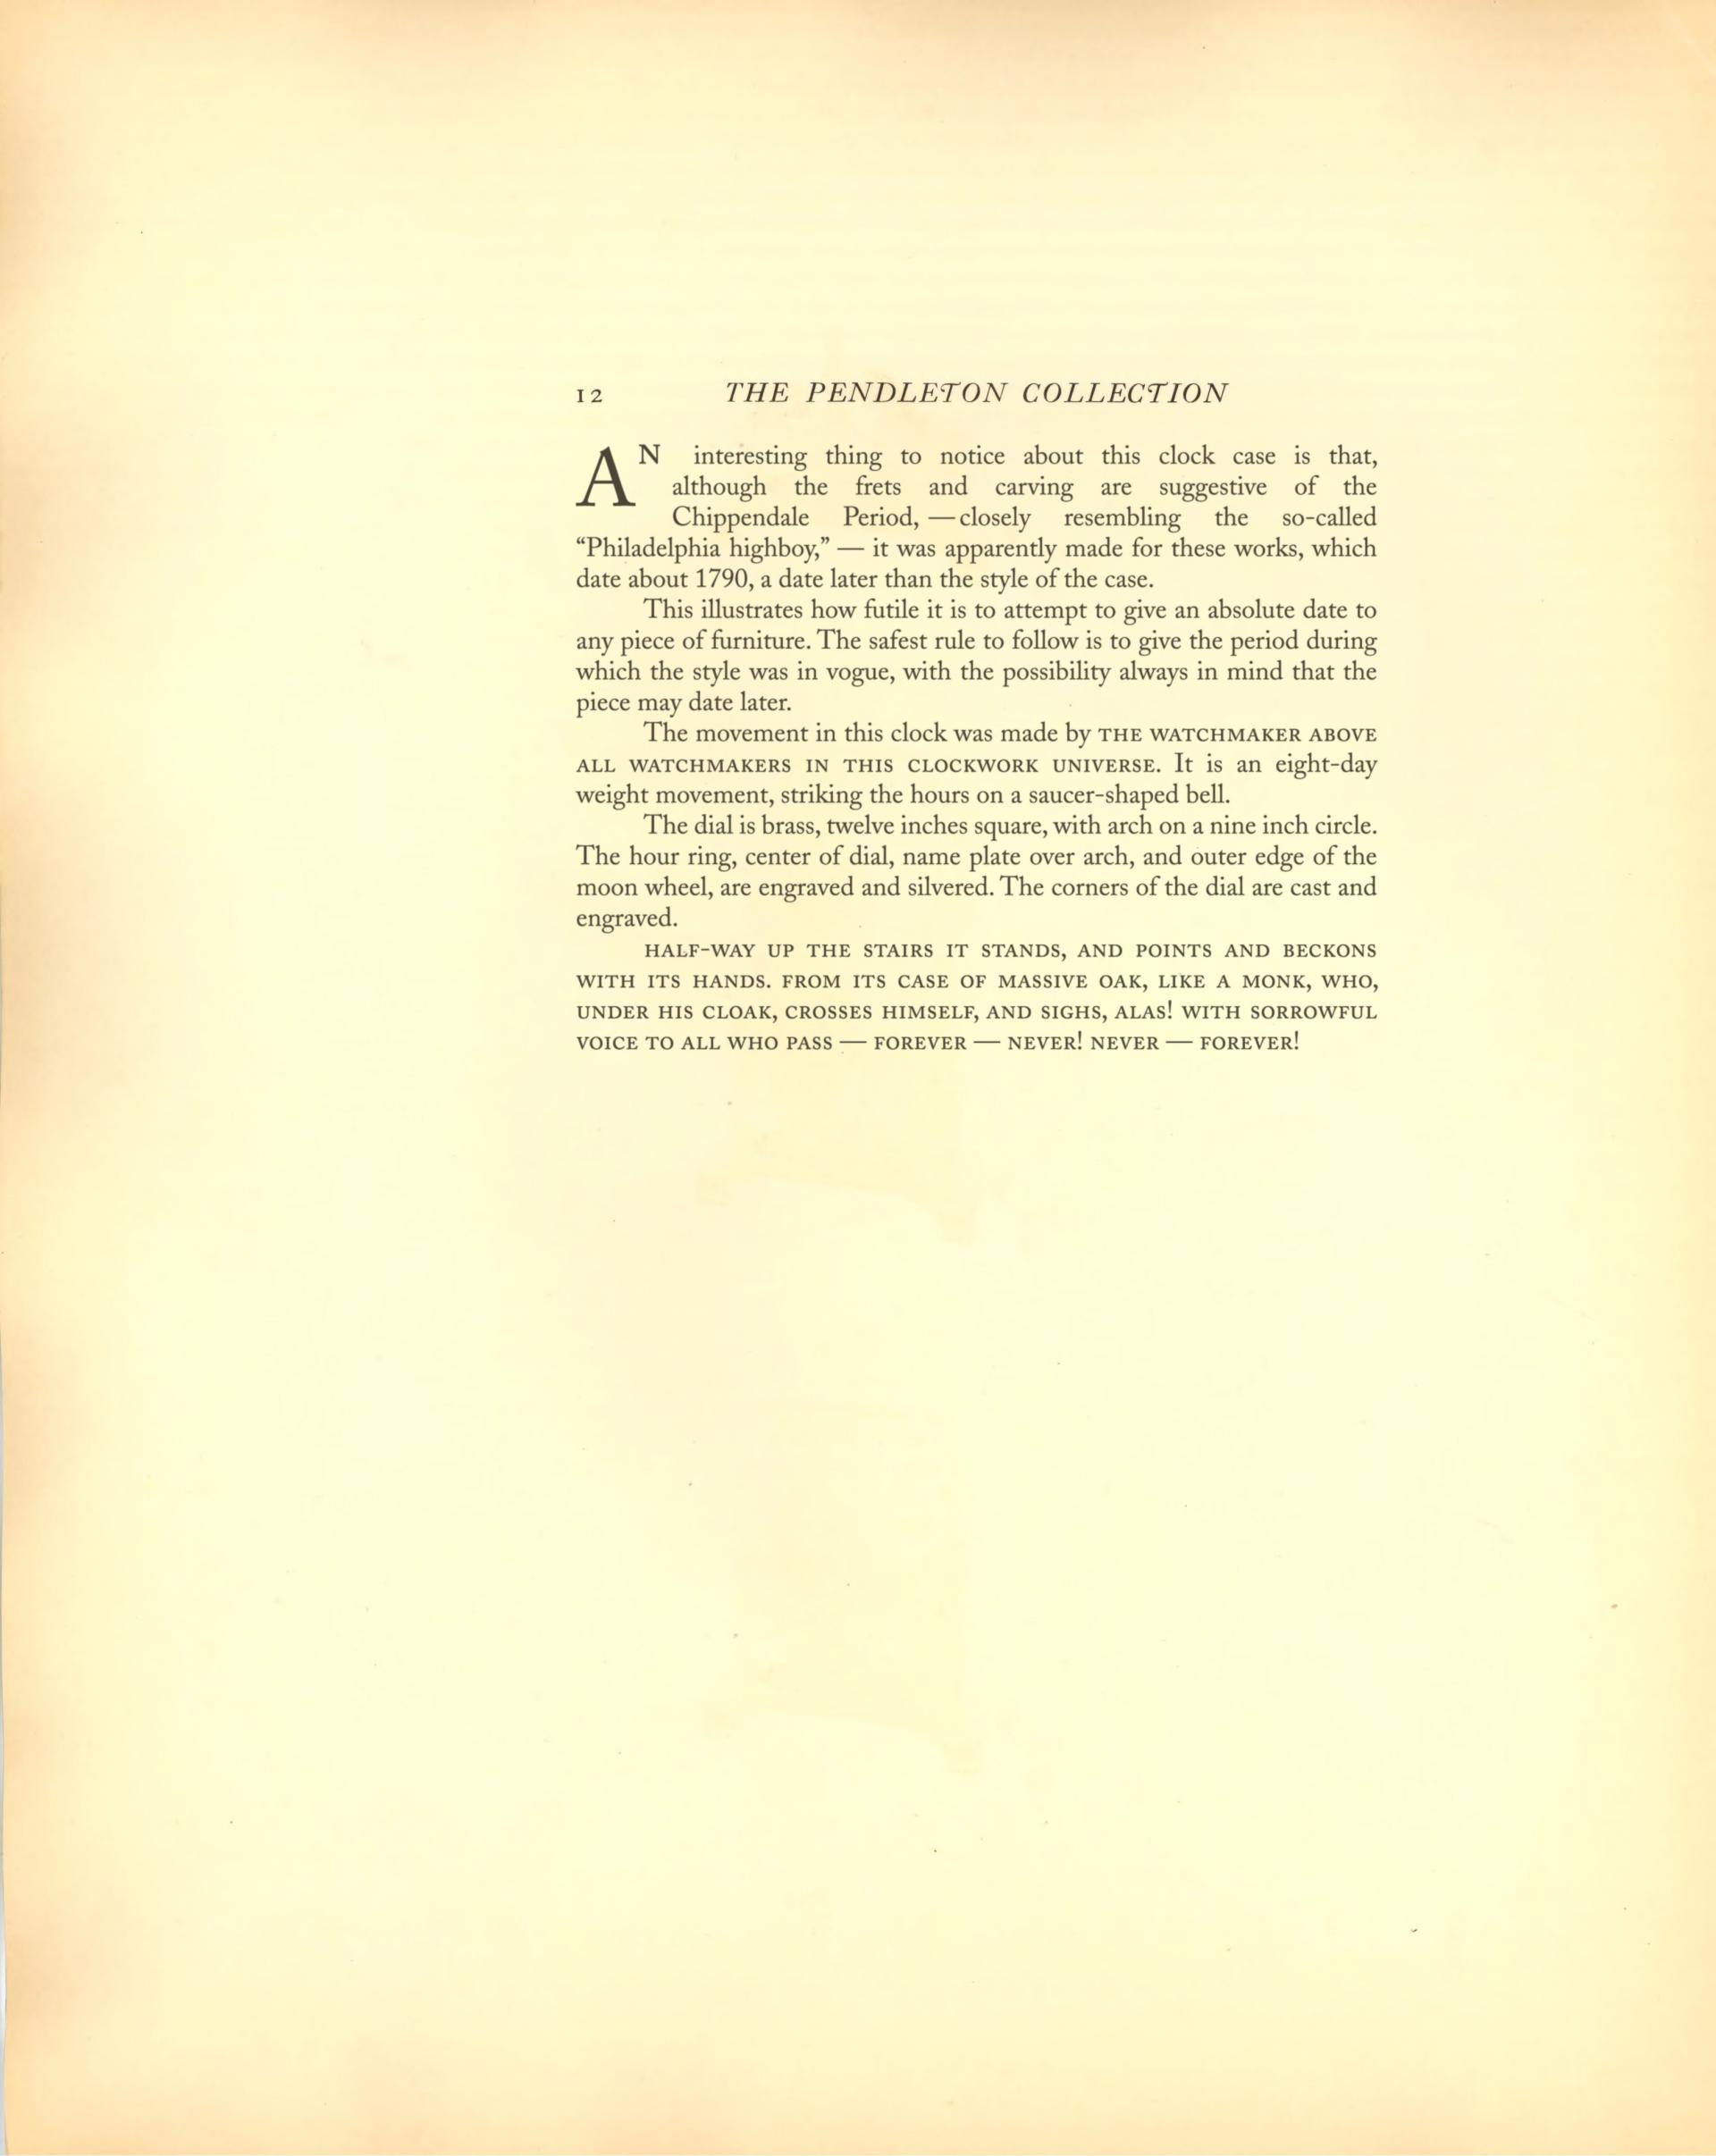 Pendleton Collection page: Text page, describing a grandfather clock